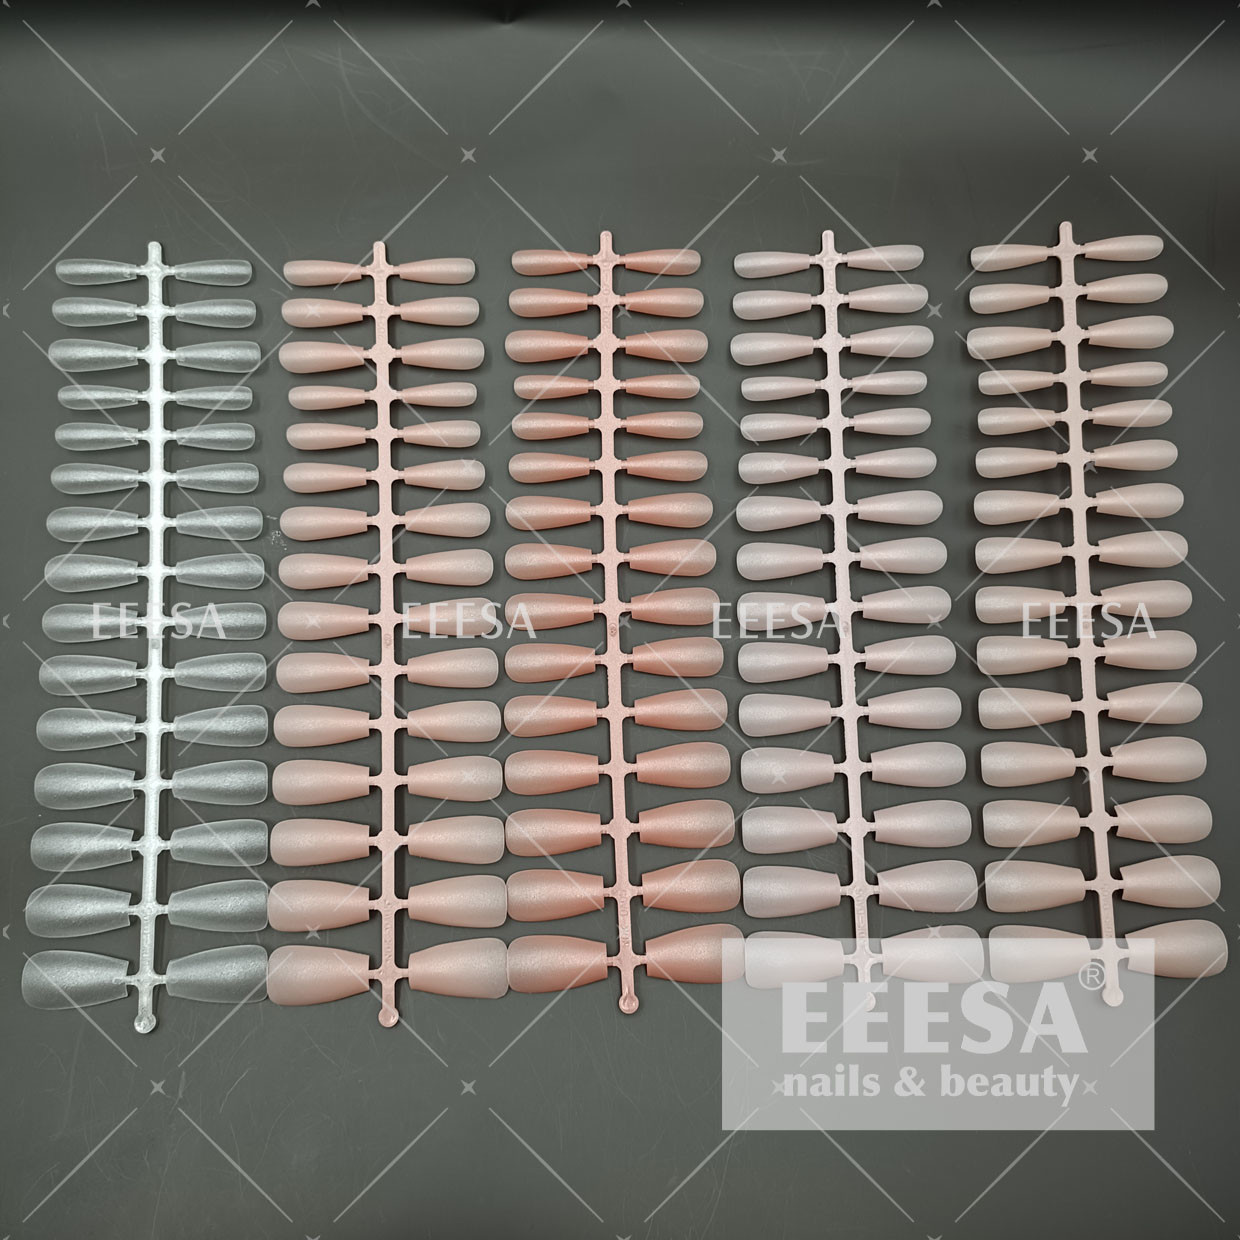  15 Sizes Frosted Long Medium Short Coffin Shape Press On Nails Manufactures